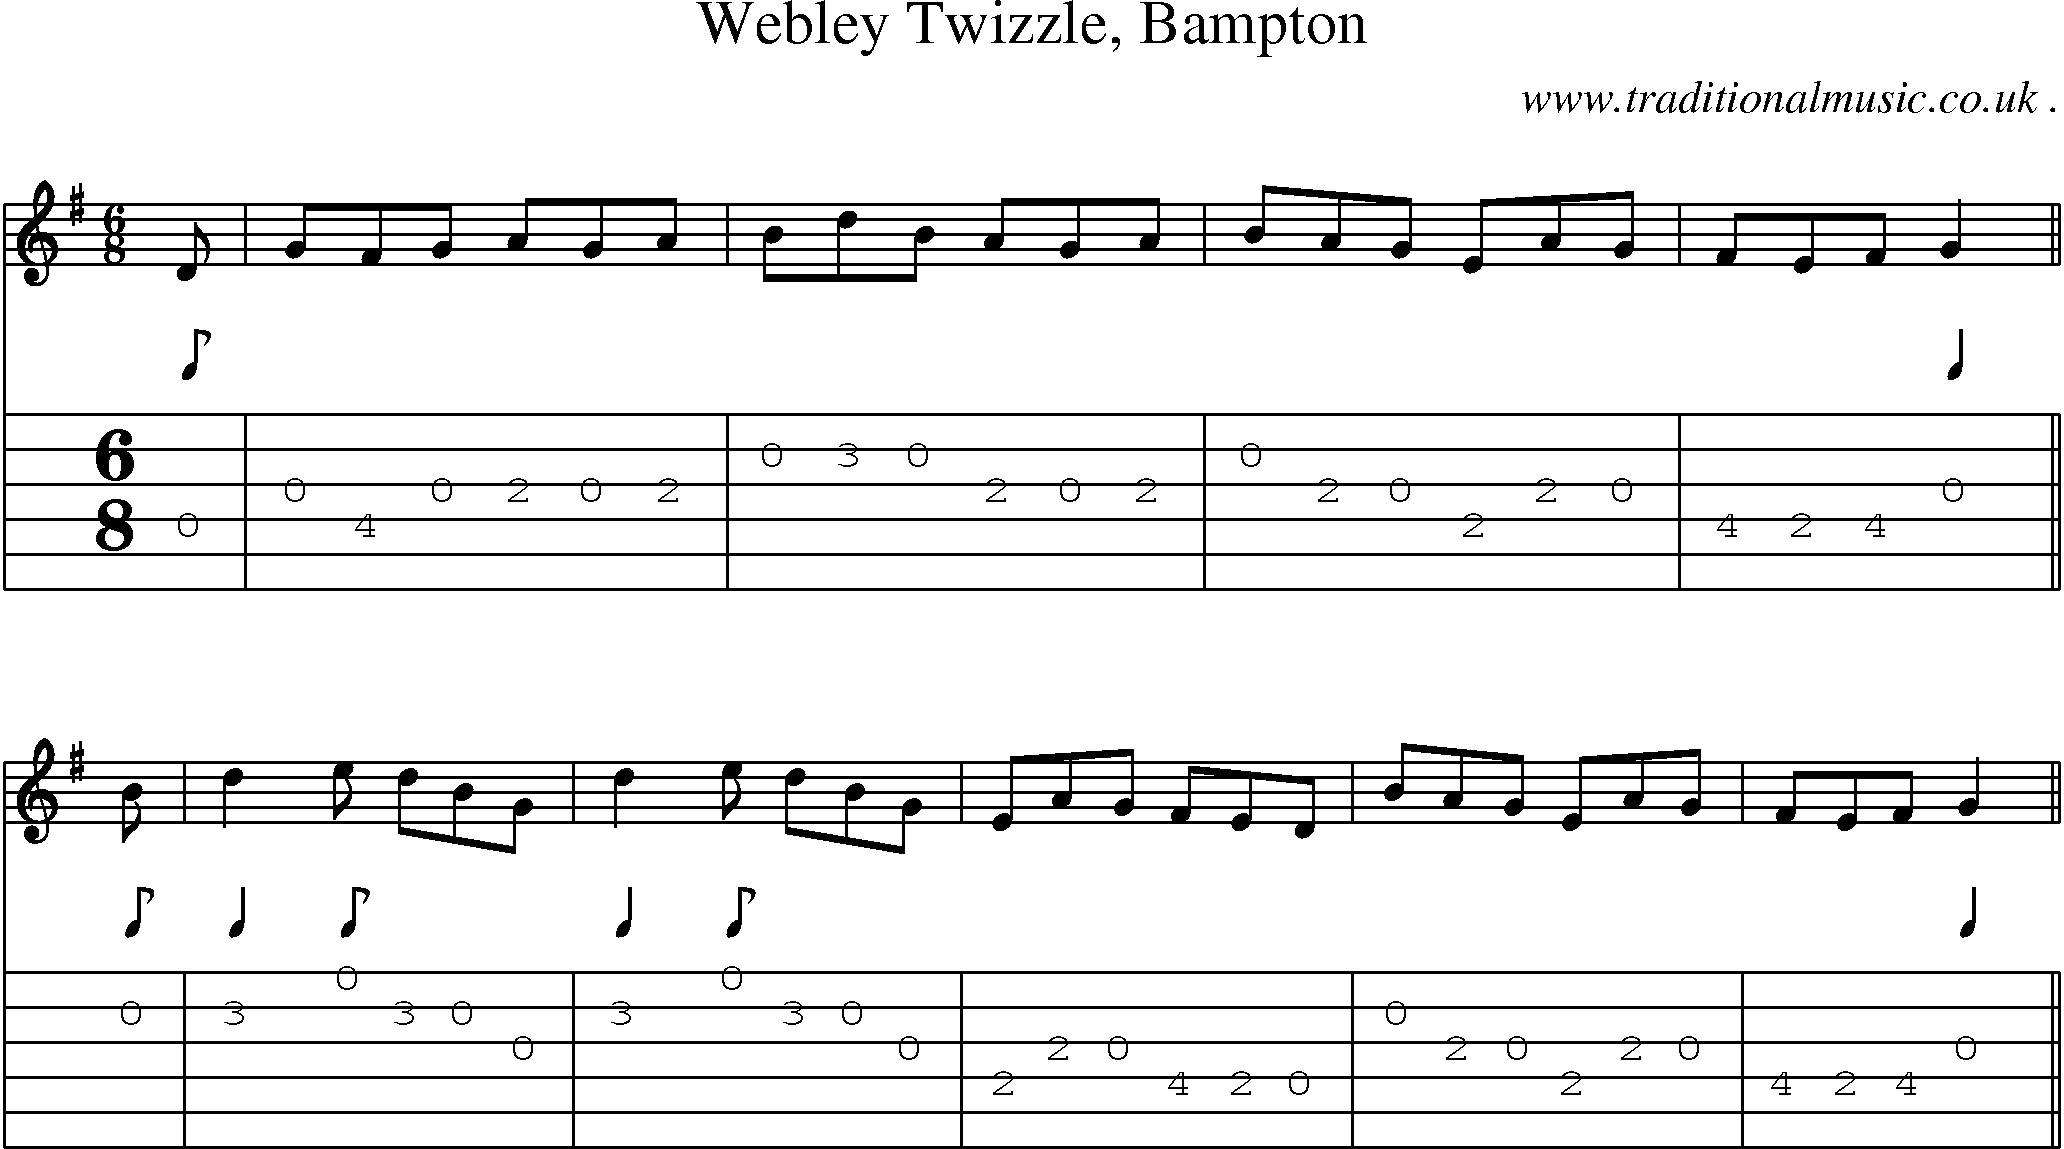 Sheet-Music and Guitar Tabs for Webley Twizzle Bampton